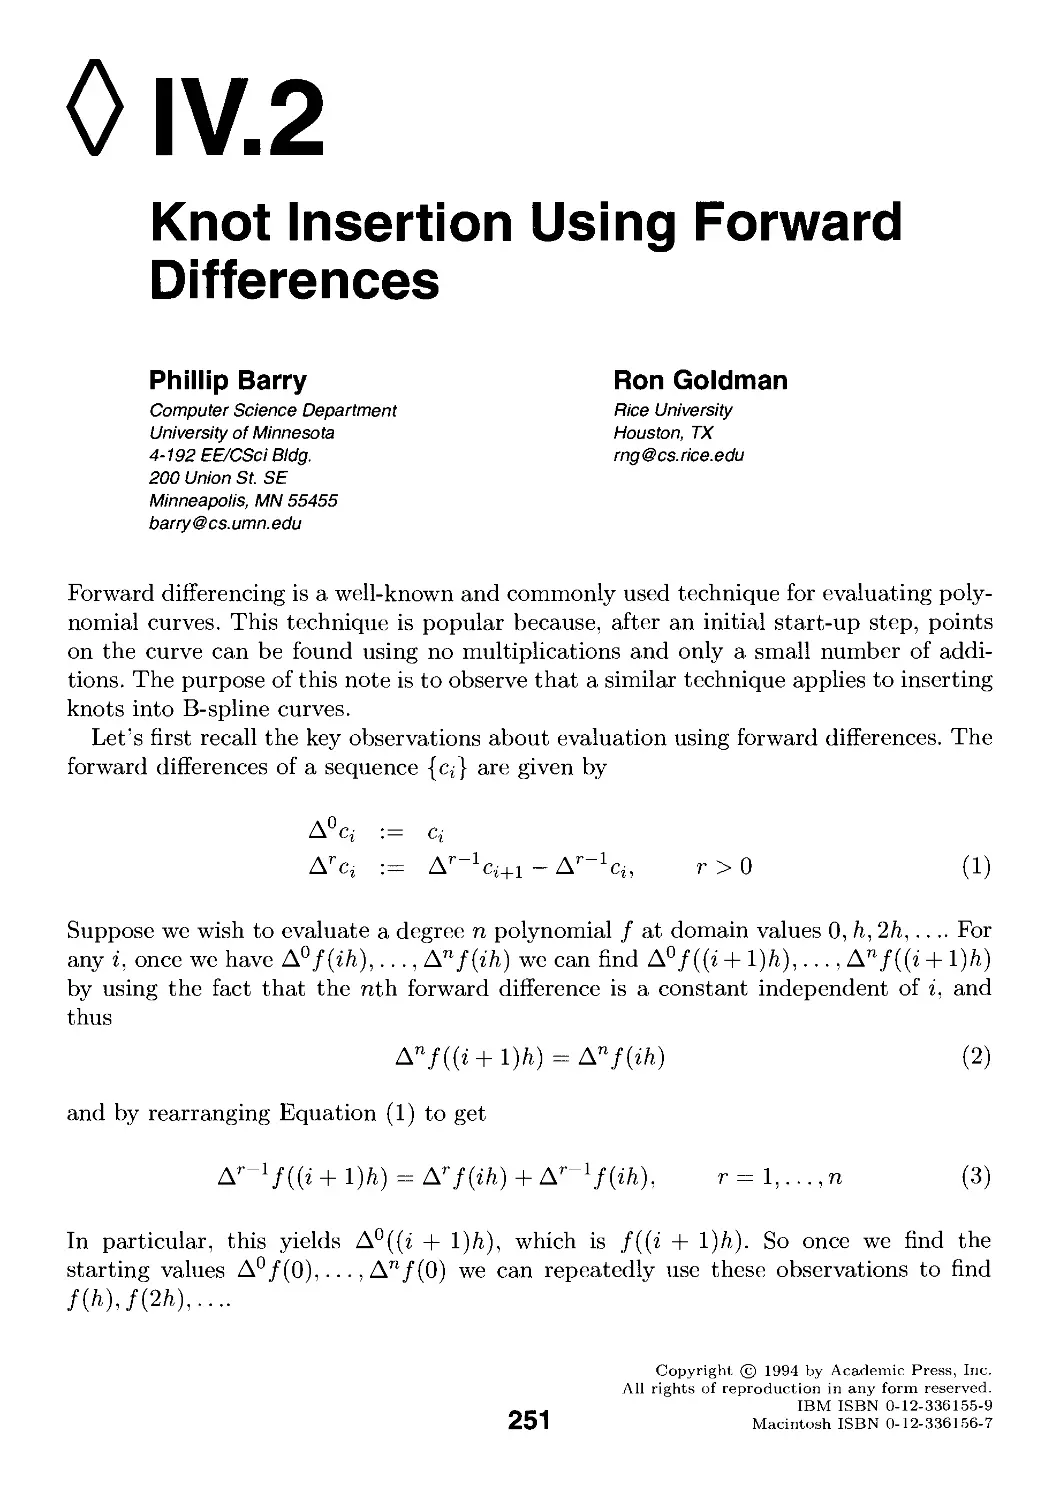 IV.2. Knot Insertion Using Forward Differences by Phillip Barry and Ron Goldman